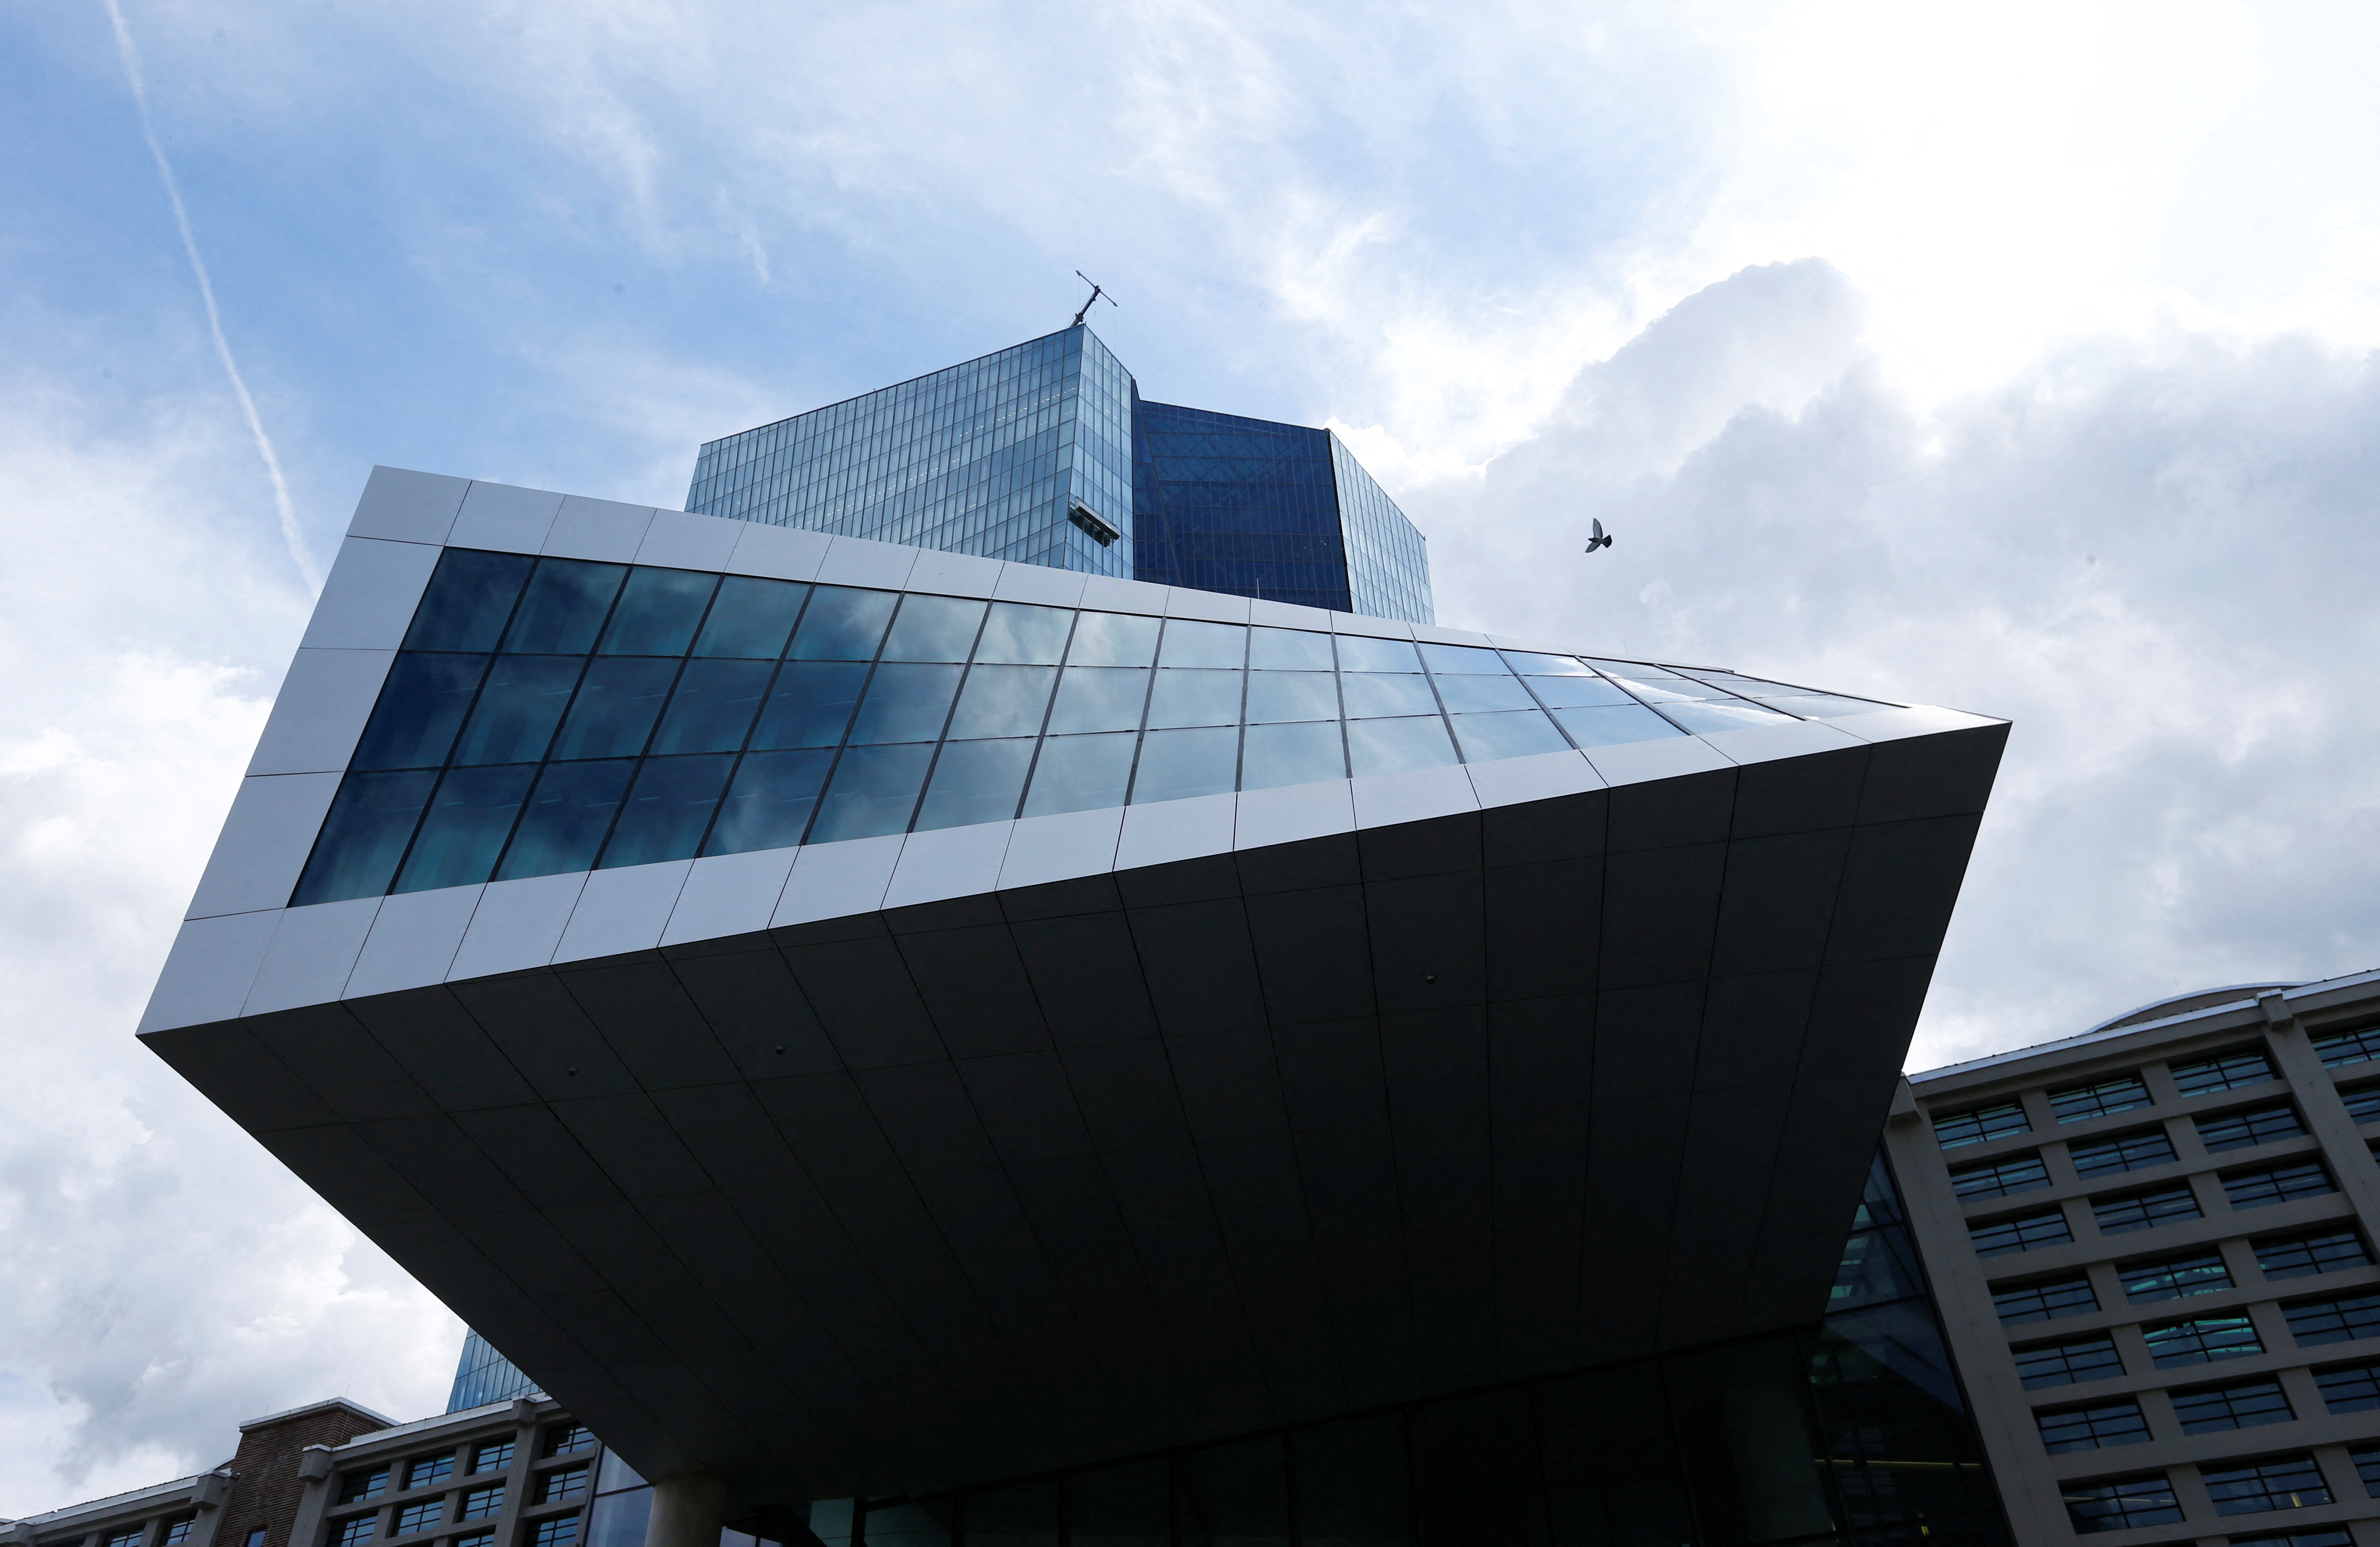 The European Central Bank (ECB) headquarters are pictured in Frankfurt